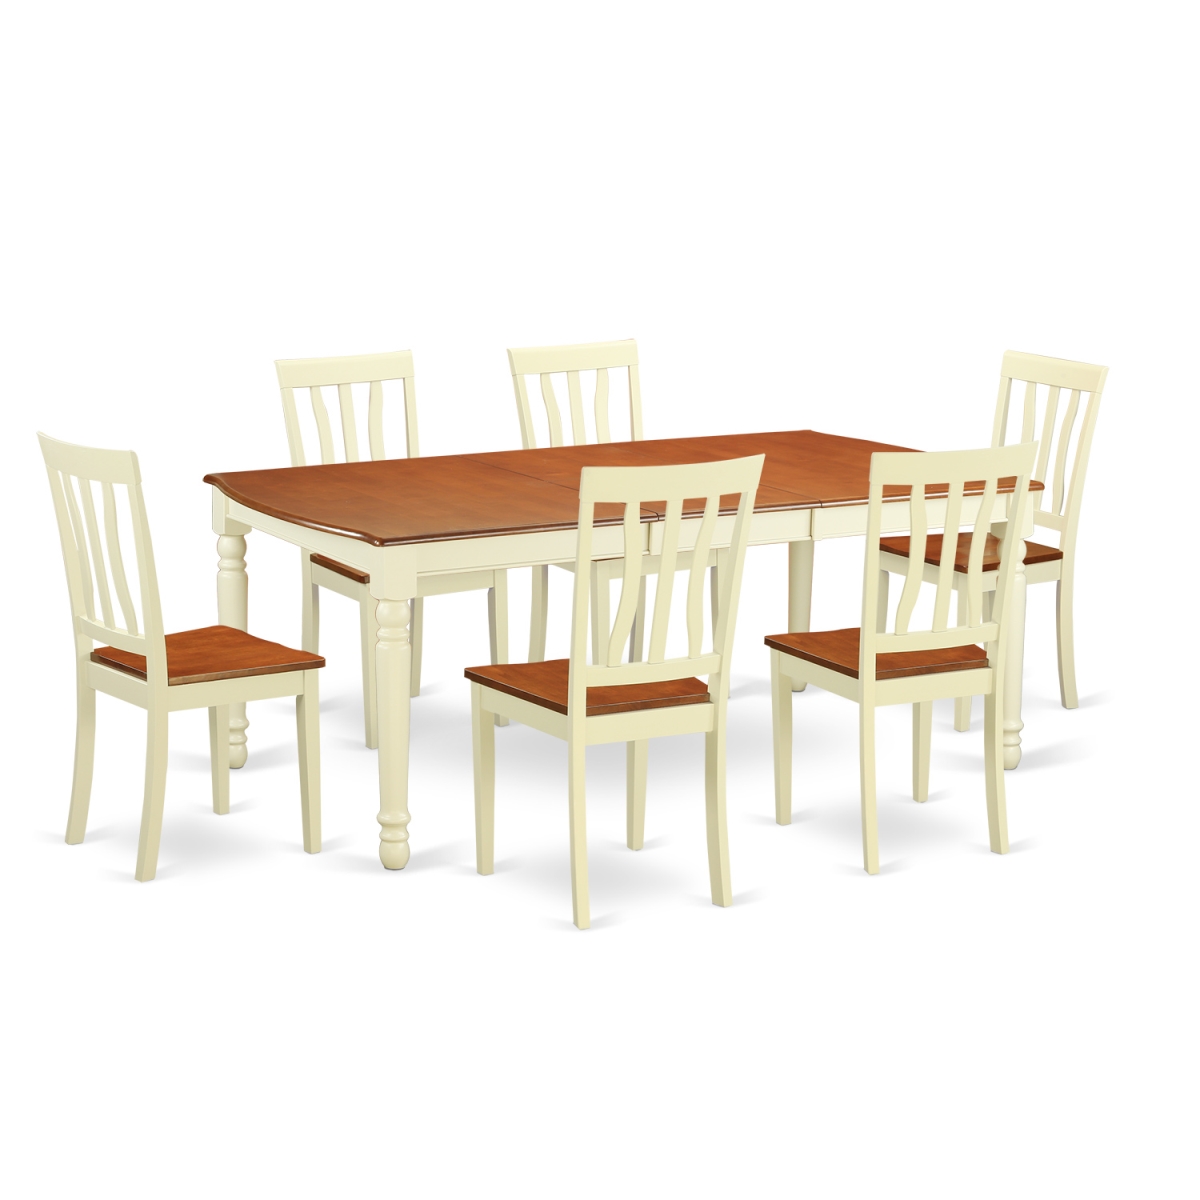 DOAN7-WHI-W Dining Room Table Set with 6 Kitchen Table & 6 Chairs, Buttermilk & Cherry - 7 Piece -  East West Furniture